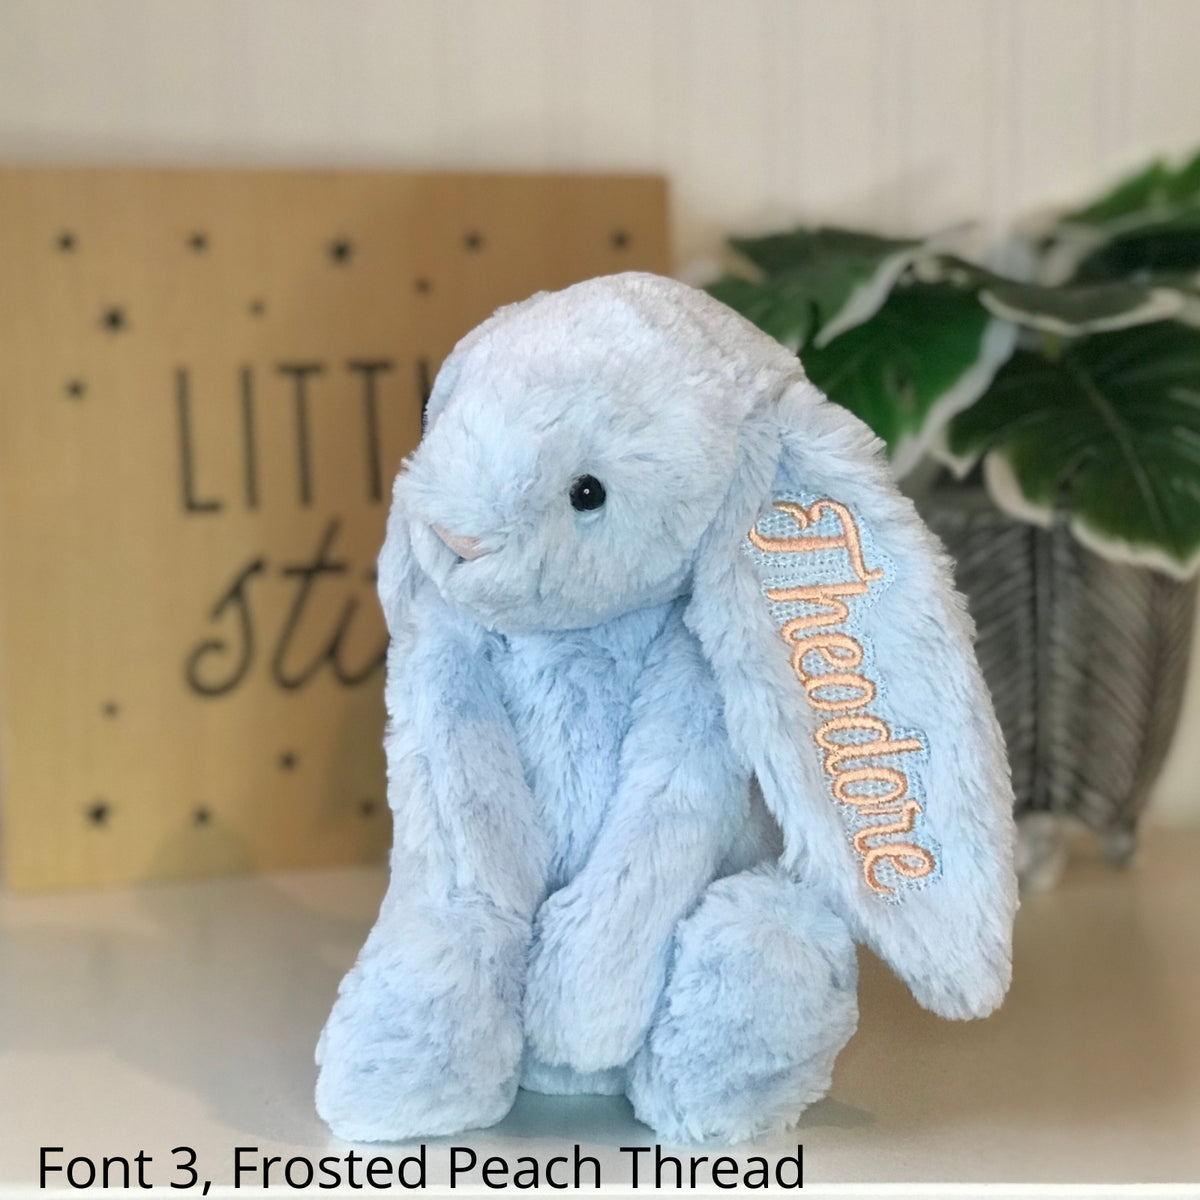 Personalised Easter Bunny Toy Embroidered Name